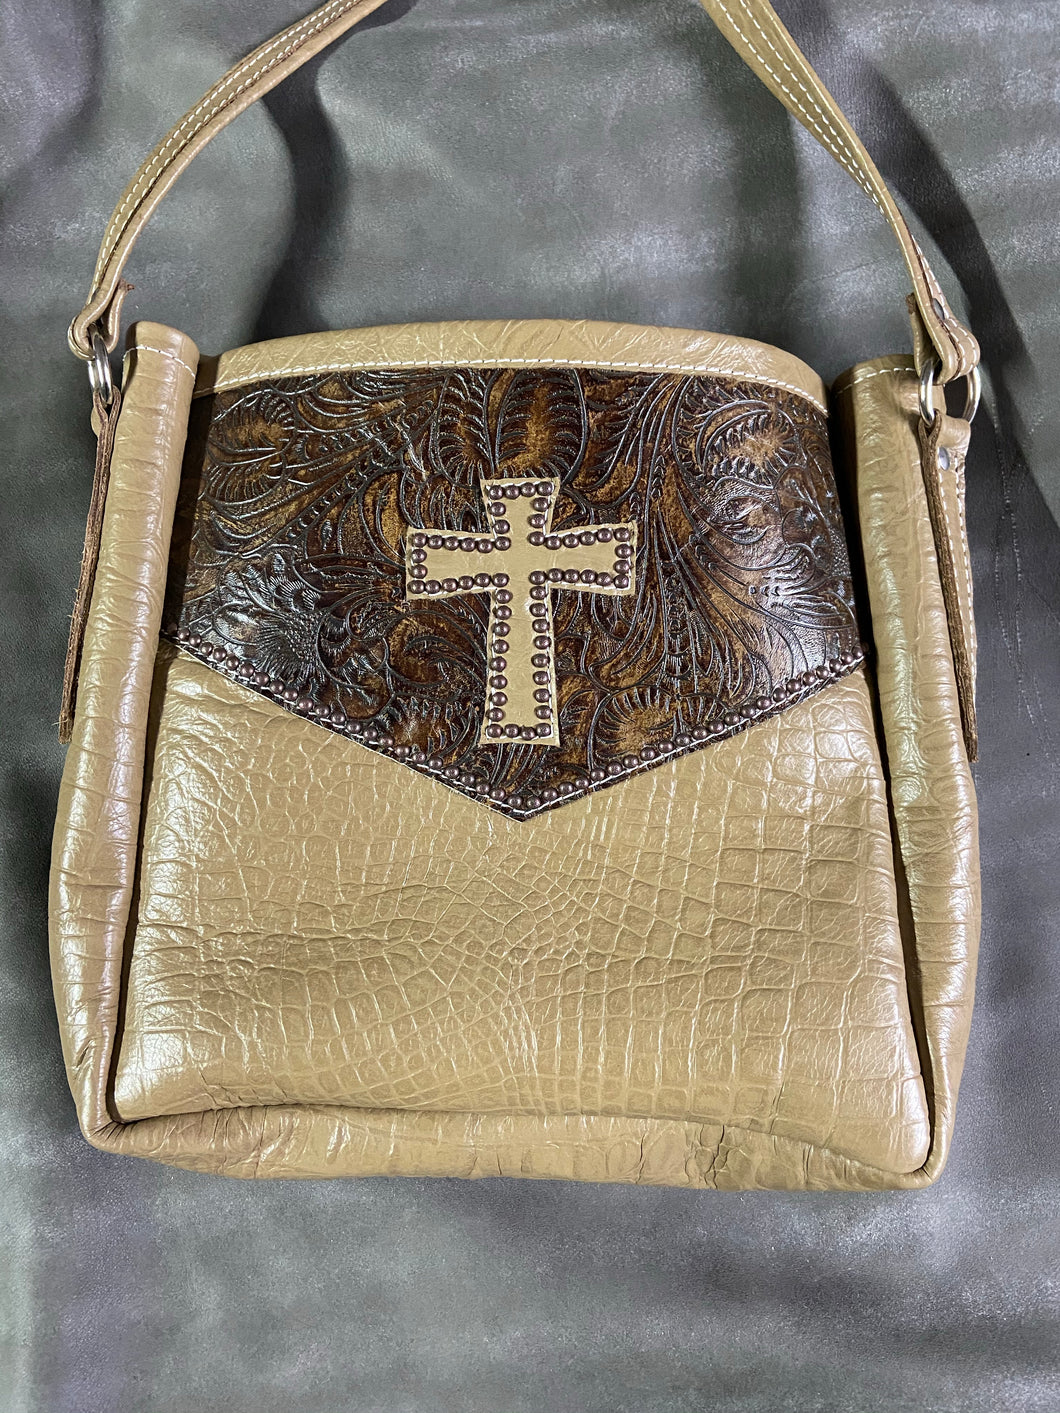 Tan and Brown Cross Concealed Carry Purse